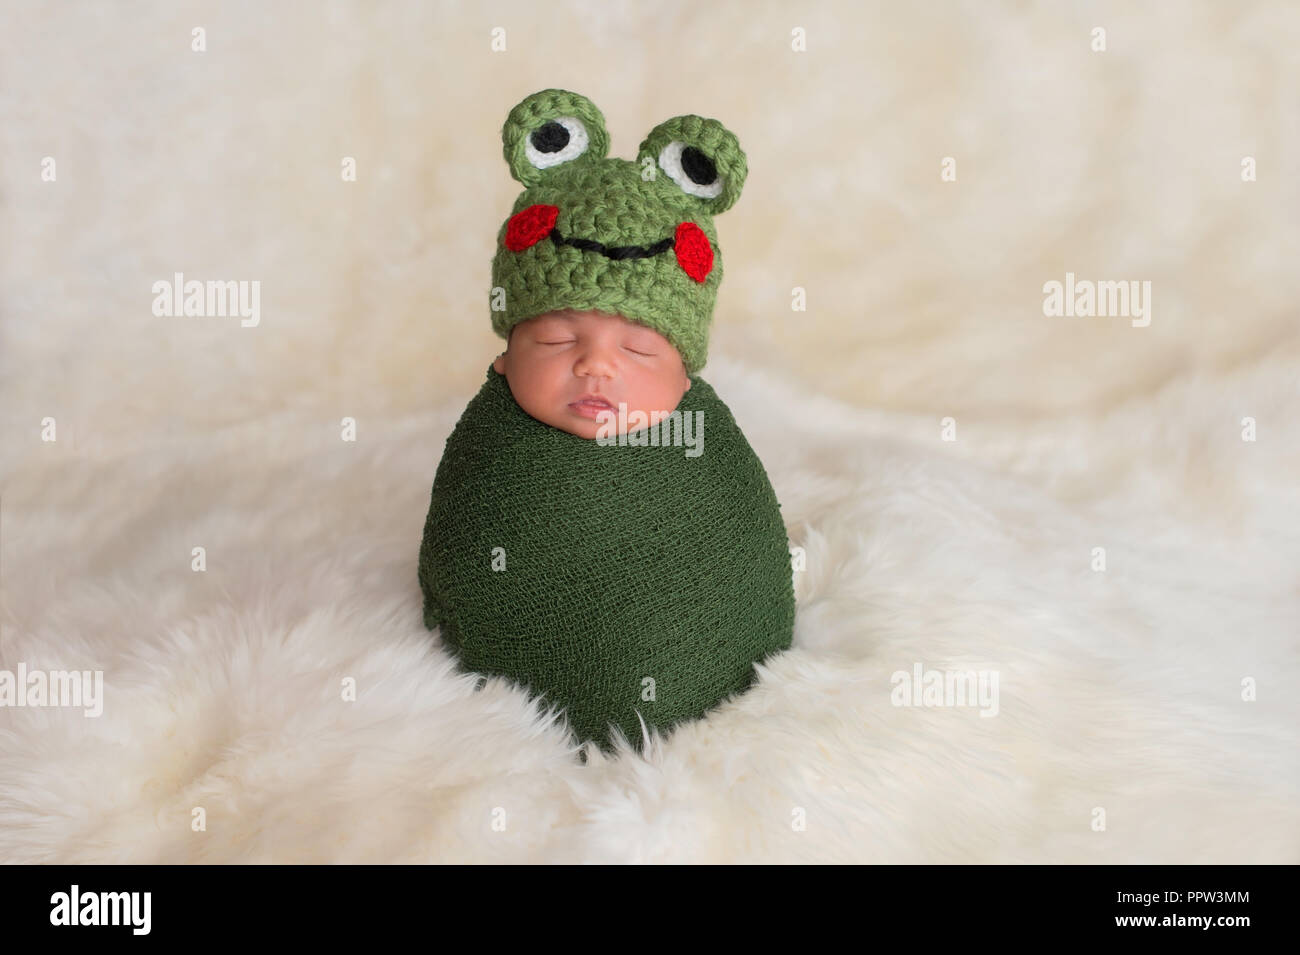 Nine day old newborn baby boy wearing a green frog hat. He is sleeping upright while swaddled in a stretch wrap. Stock Photo